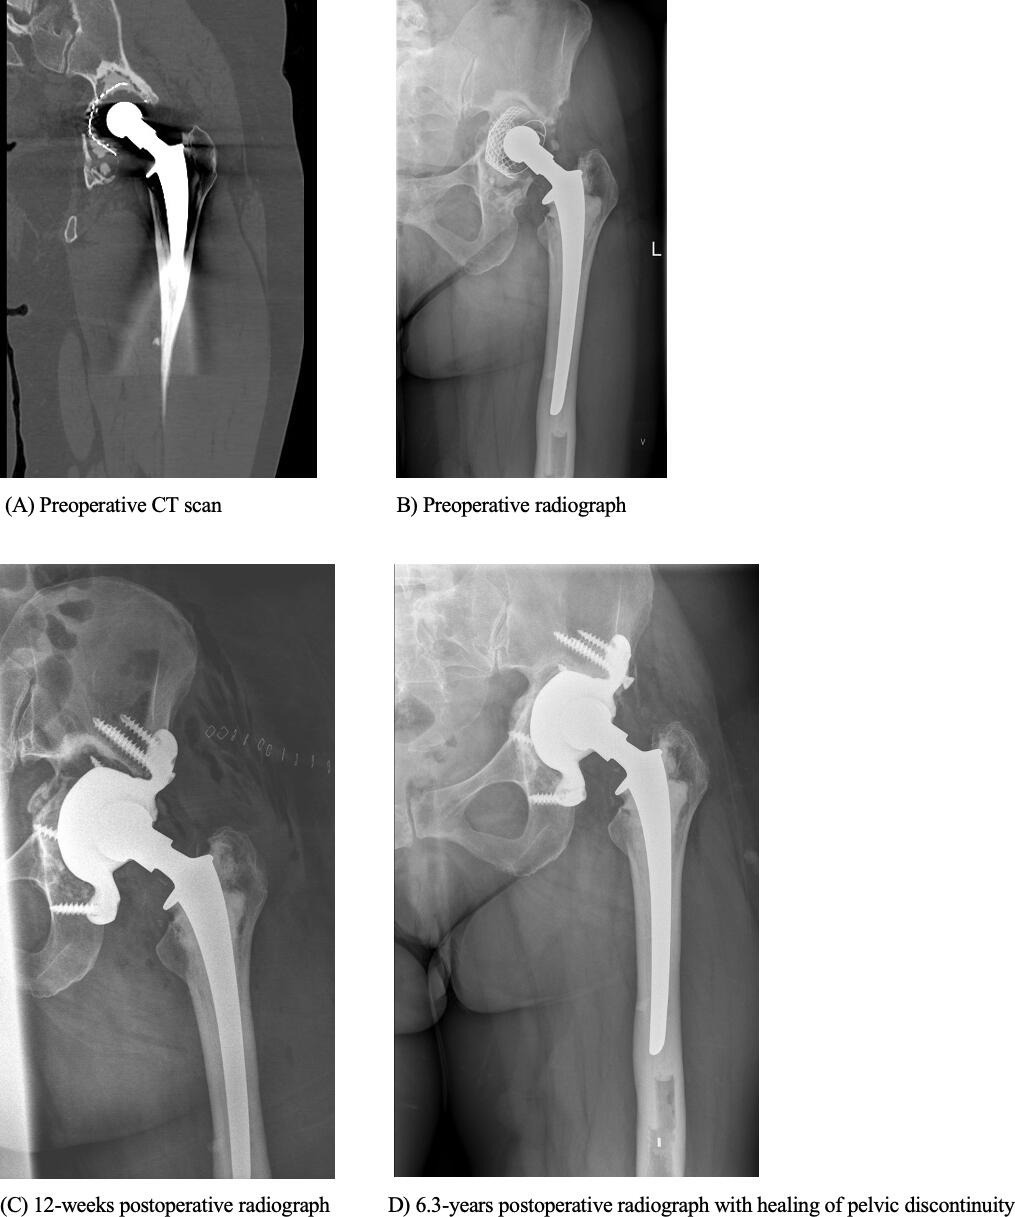 Fig. 4 
          a) Preoperative CT scan, coronal view of a 64-year-old female. b) Preoperative radiograph, anteroposterior (AP) view. c) Postoperative radiograph at 12 weeks, AP view. d) Postoperative radiograph at 6.3 years with healing of pelvic discontinuity, AP view.
        